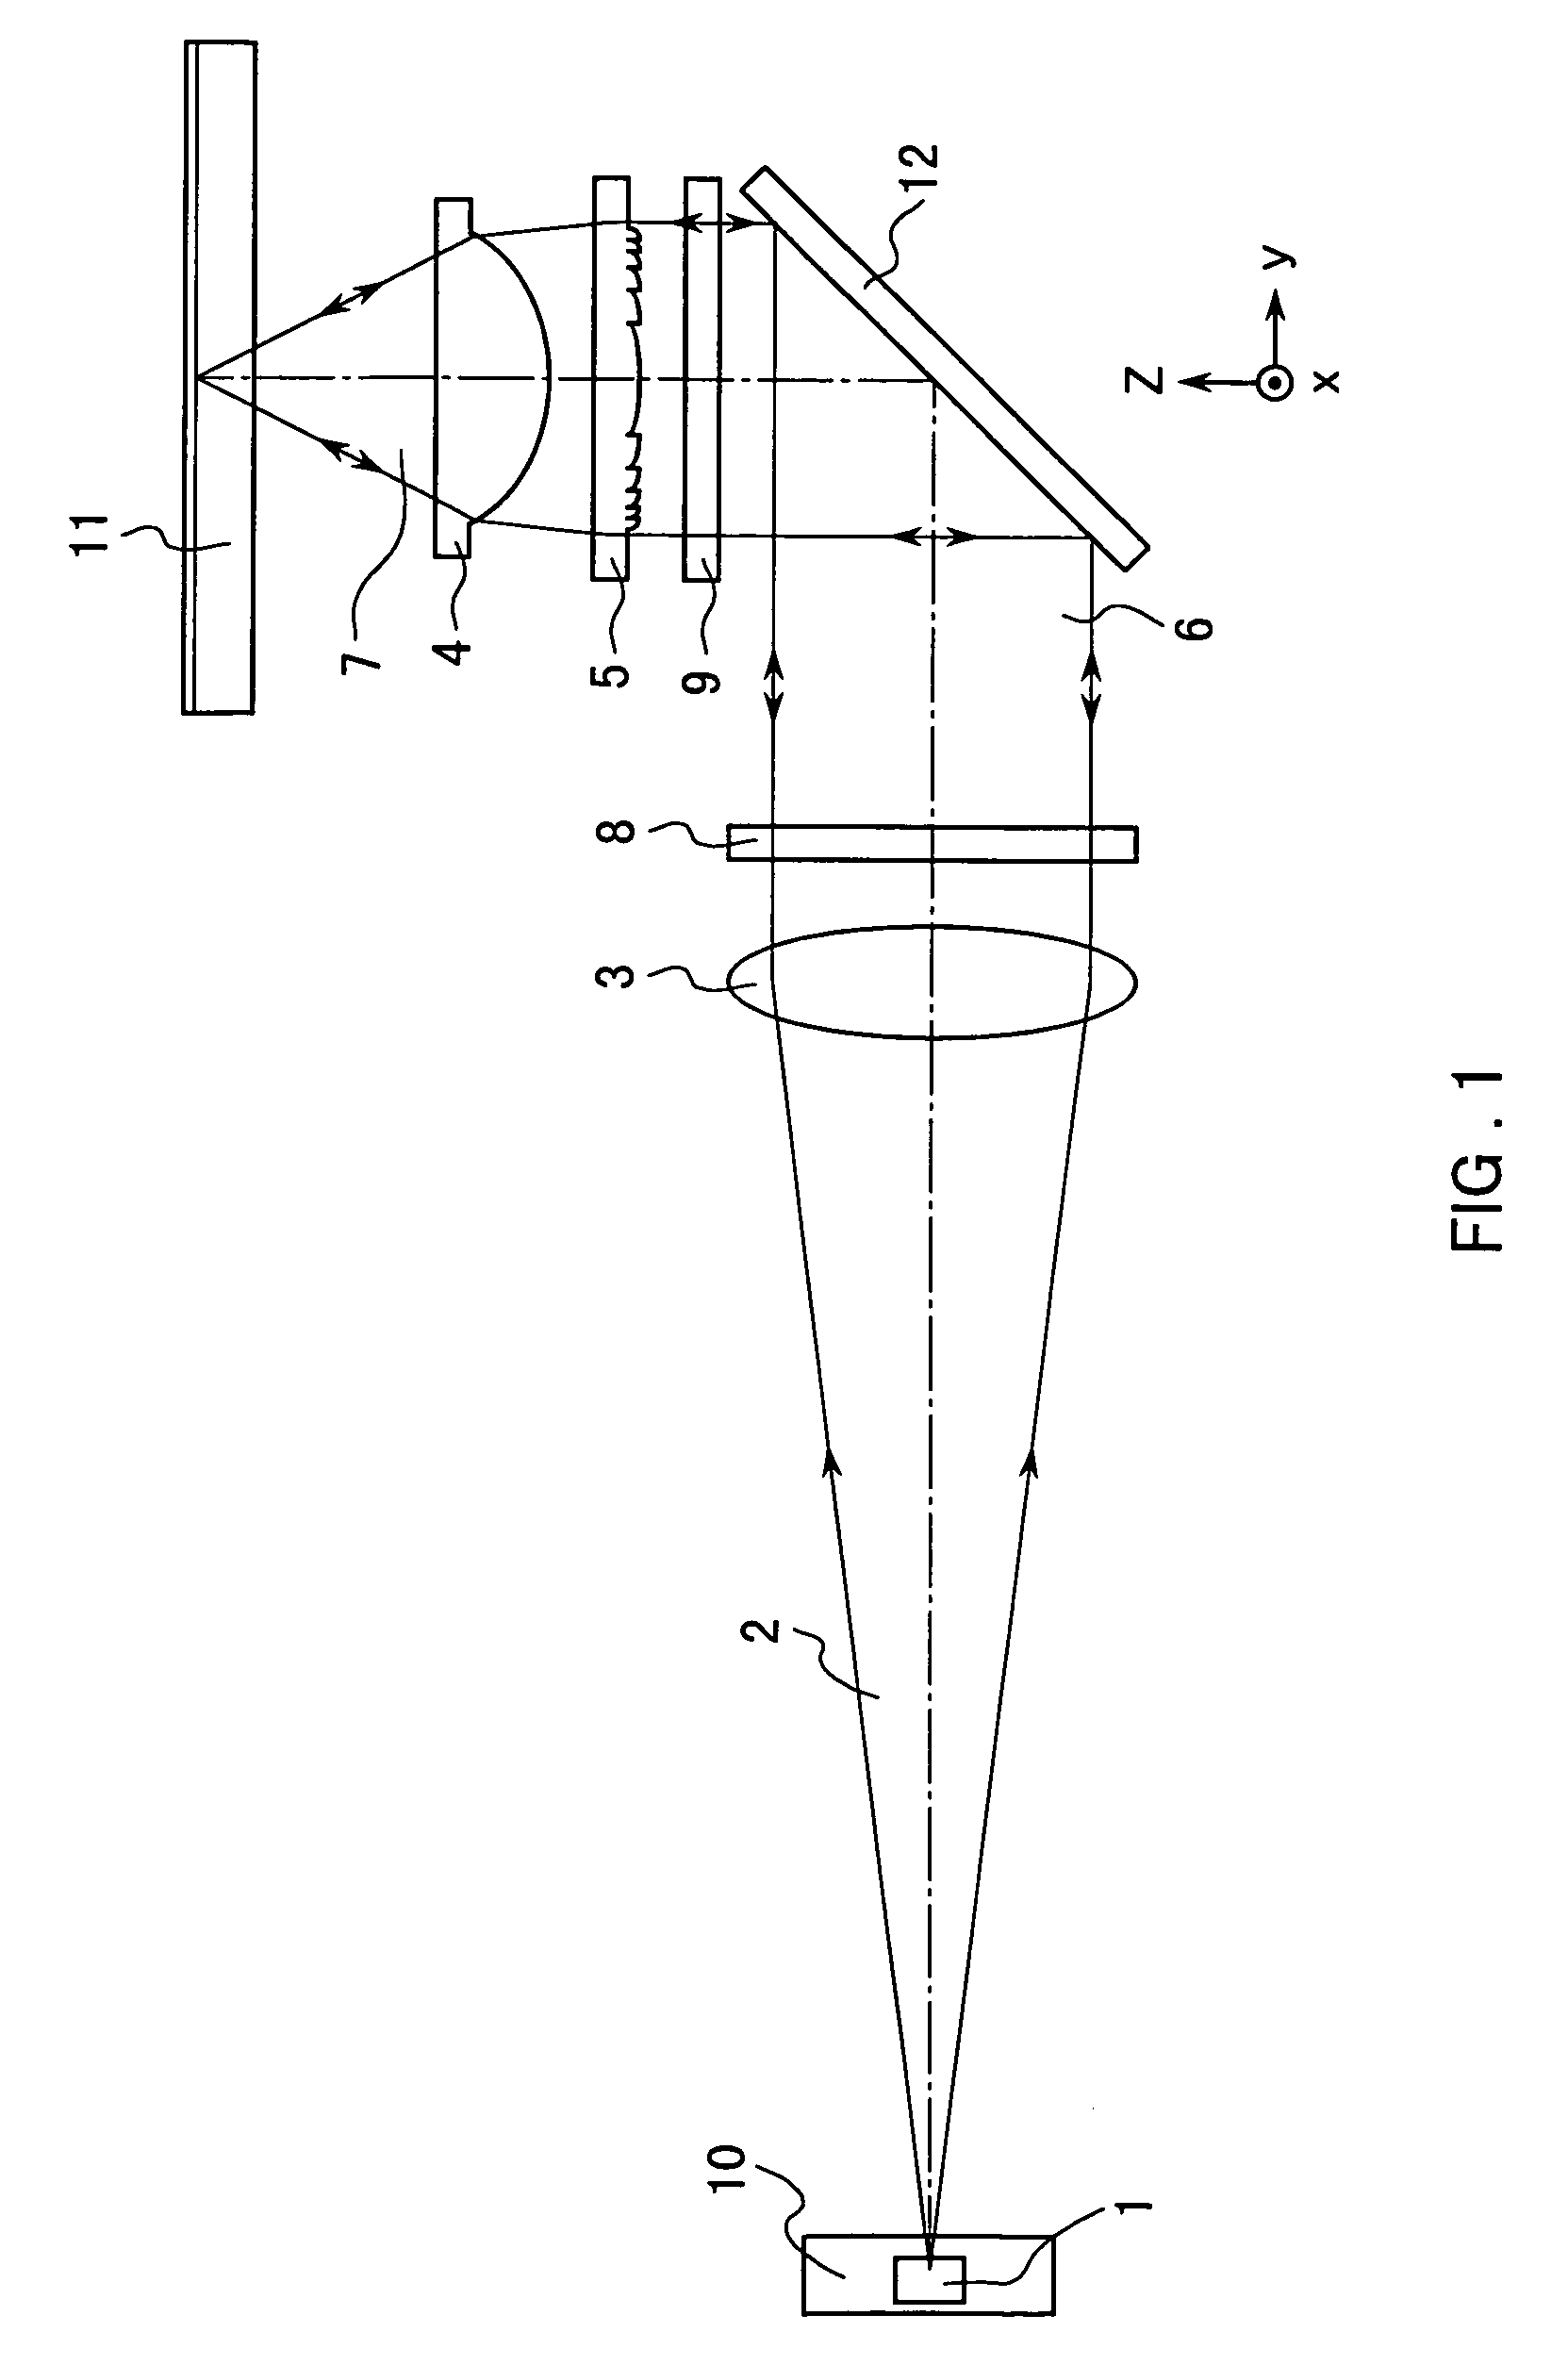 Optical head with defocusing correction and spherical aberration correction